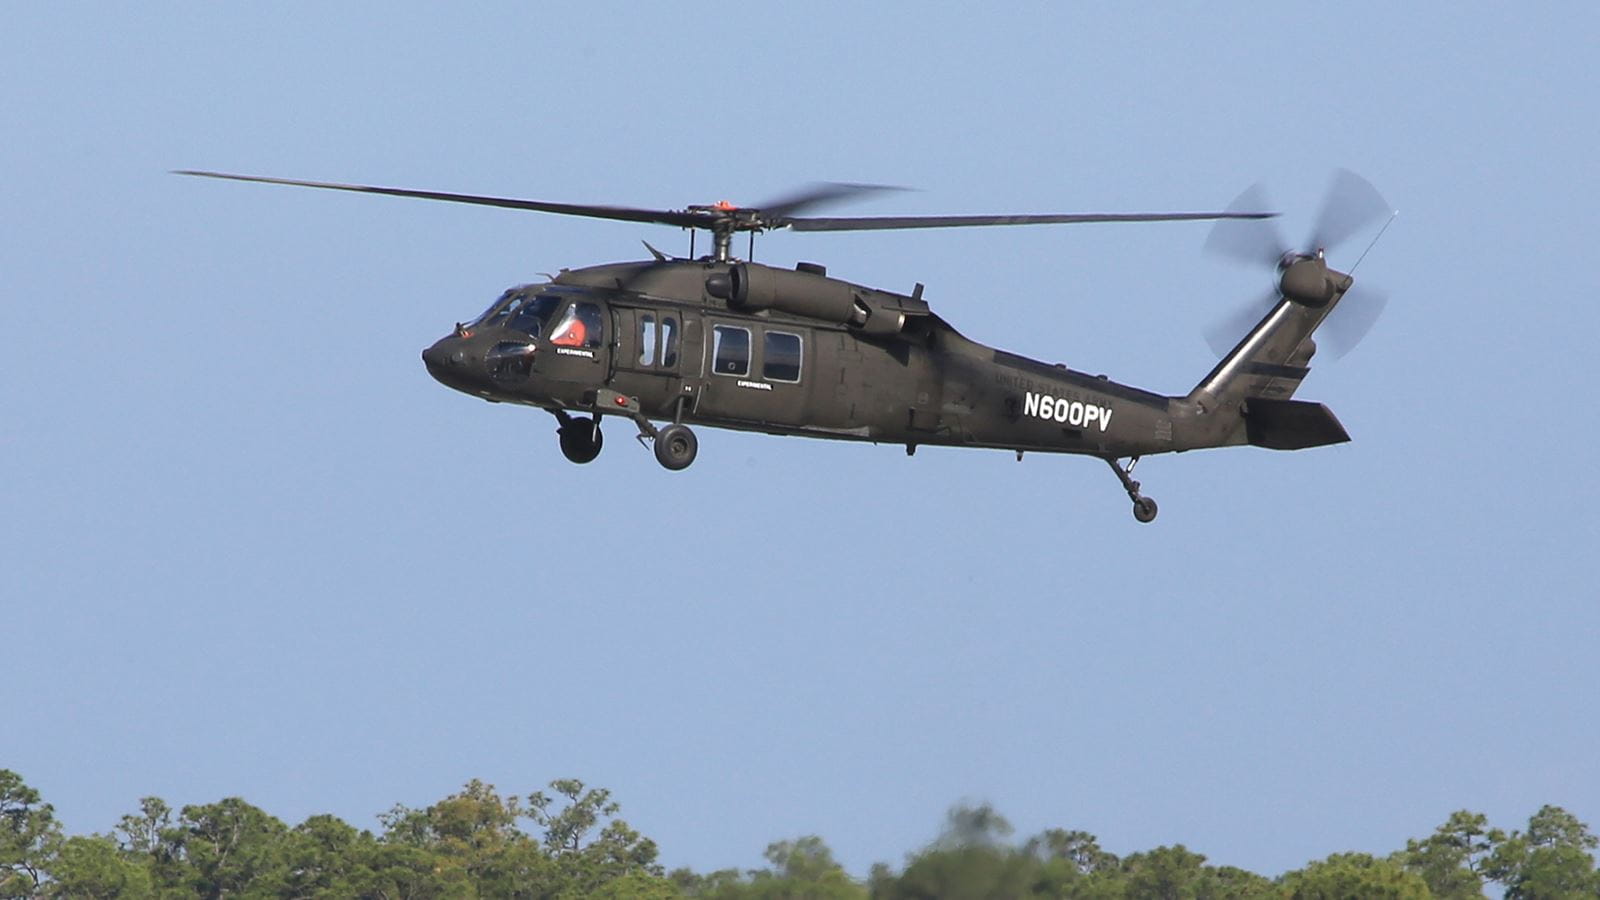 Black Hawk S70 helicopter